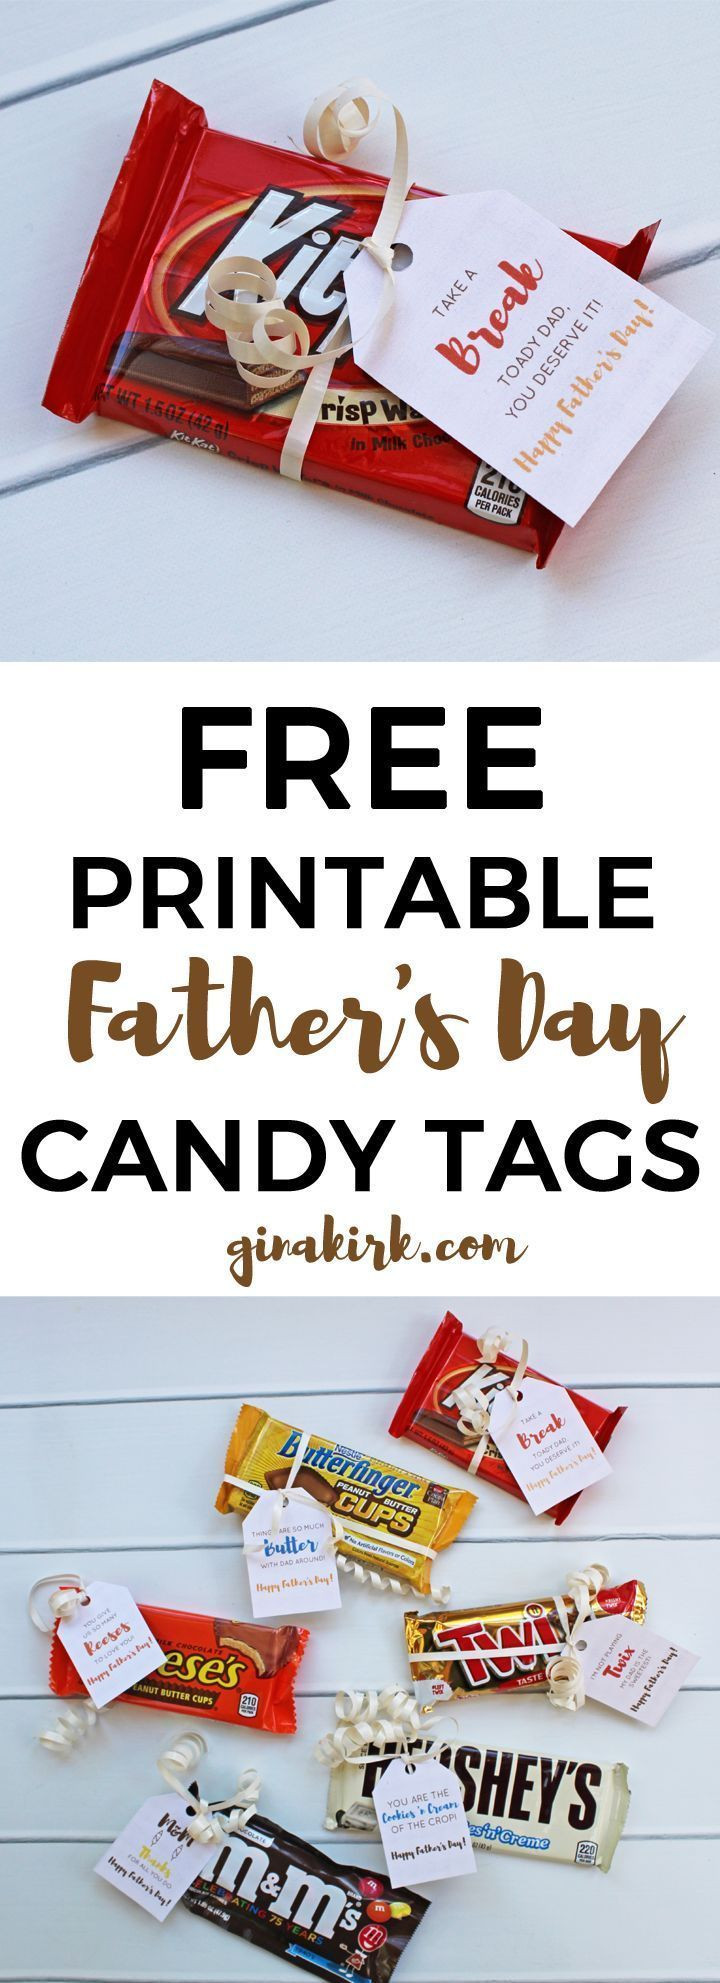 Happy Fathers Day Gift Ideas
 Free Printable Candy Tags for Father s Day